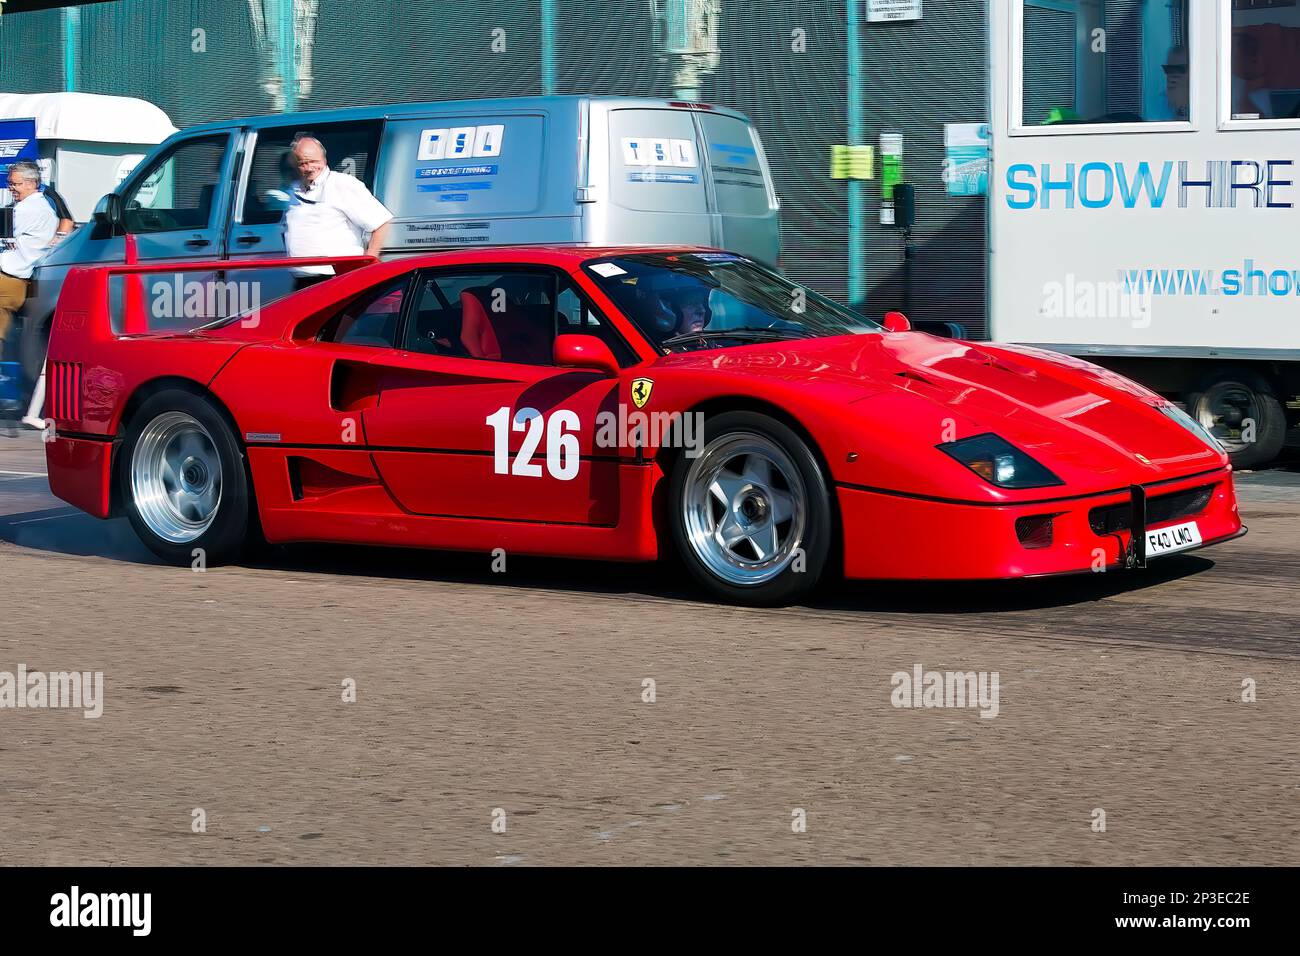 Robert Oram driving a Ferrari F40 at The Brighton National Speed Trials 2017. This is the oldest motor racing event in the UK and is held in the south east coastal town of Brighton. Madeira drive is a road which runs along the seafront and is normal full of people explorer the beach, pier and local attractions. Today it is turned in to a 1/4 time trial course. 2nd September 2017. Stock Photo